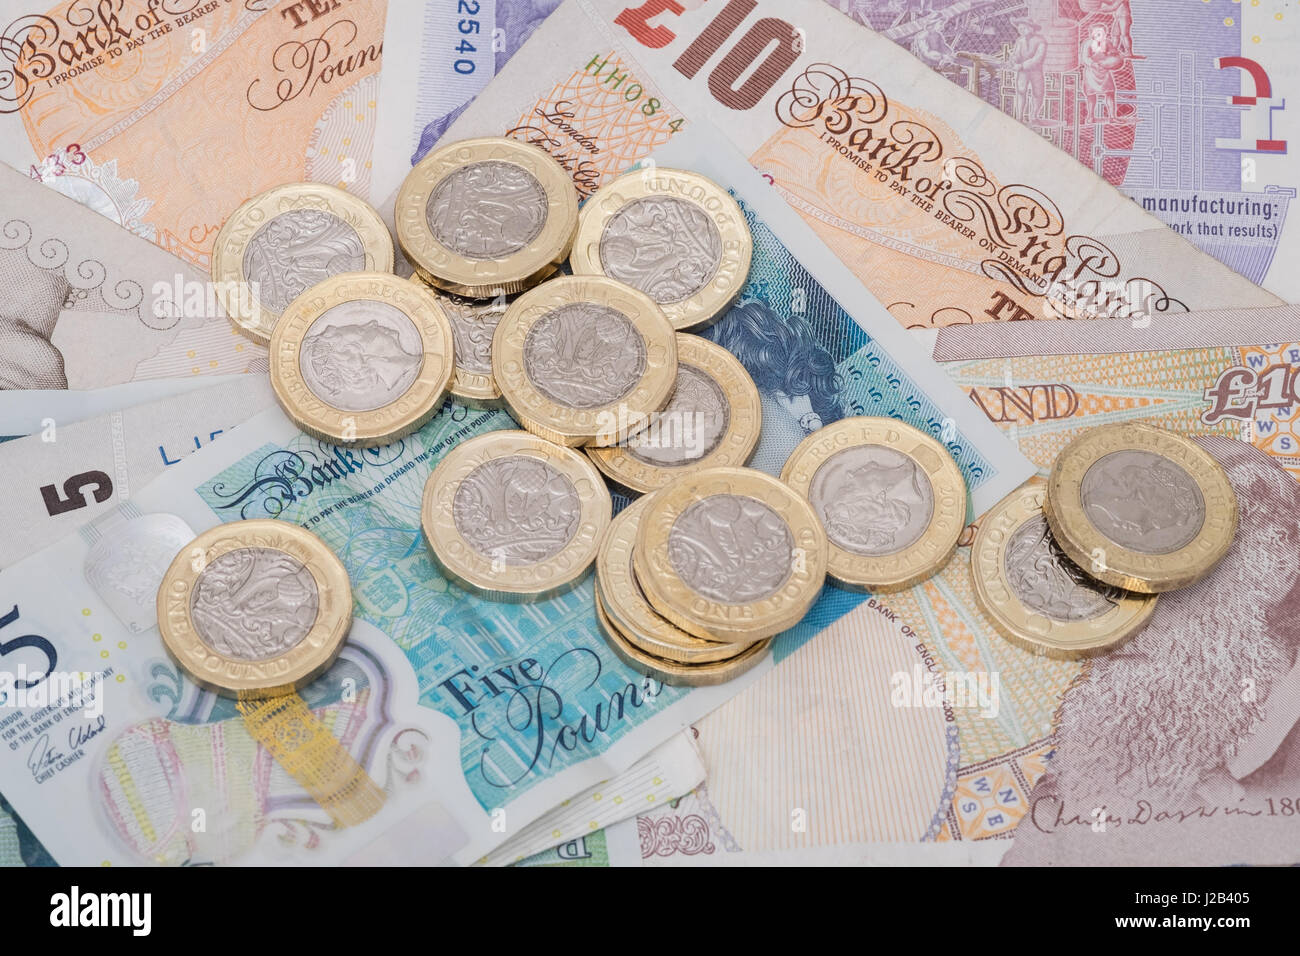 British money, coins and banknotes Stock Photo